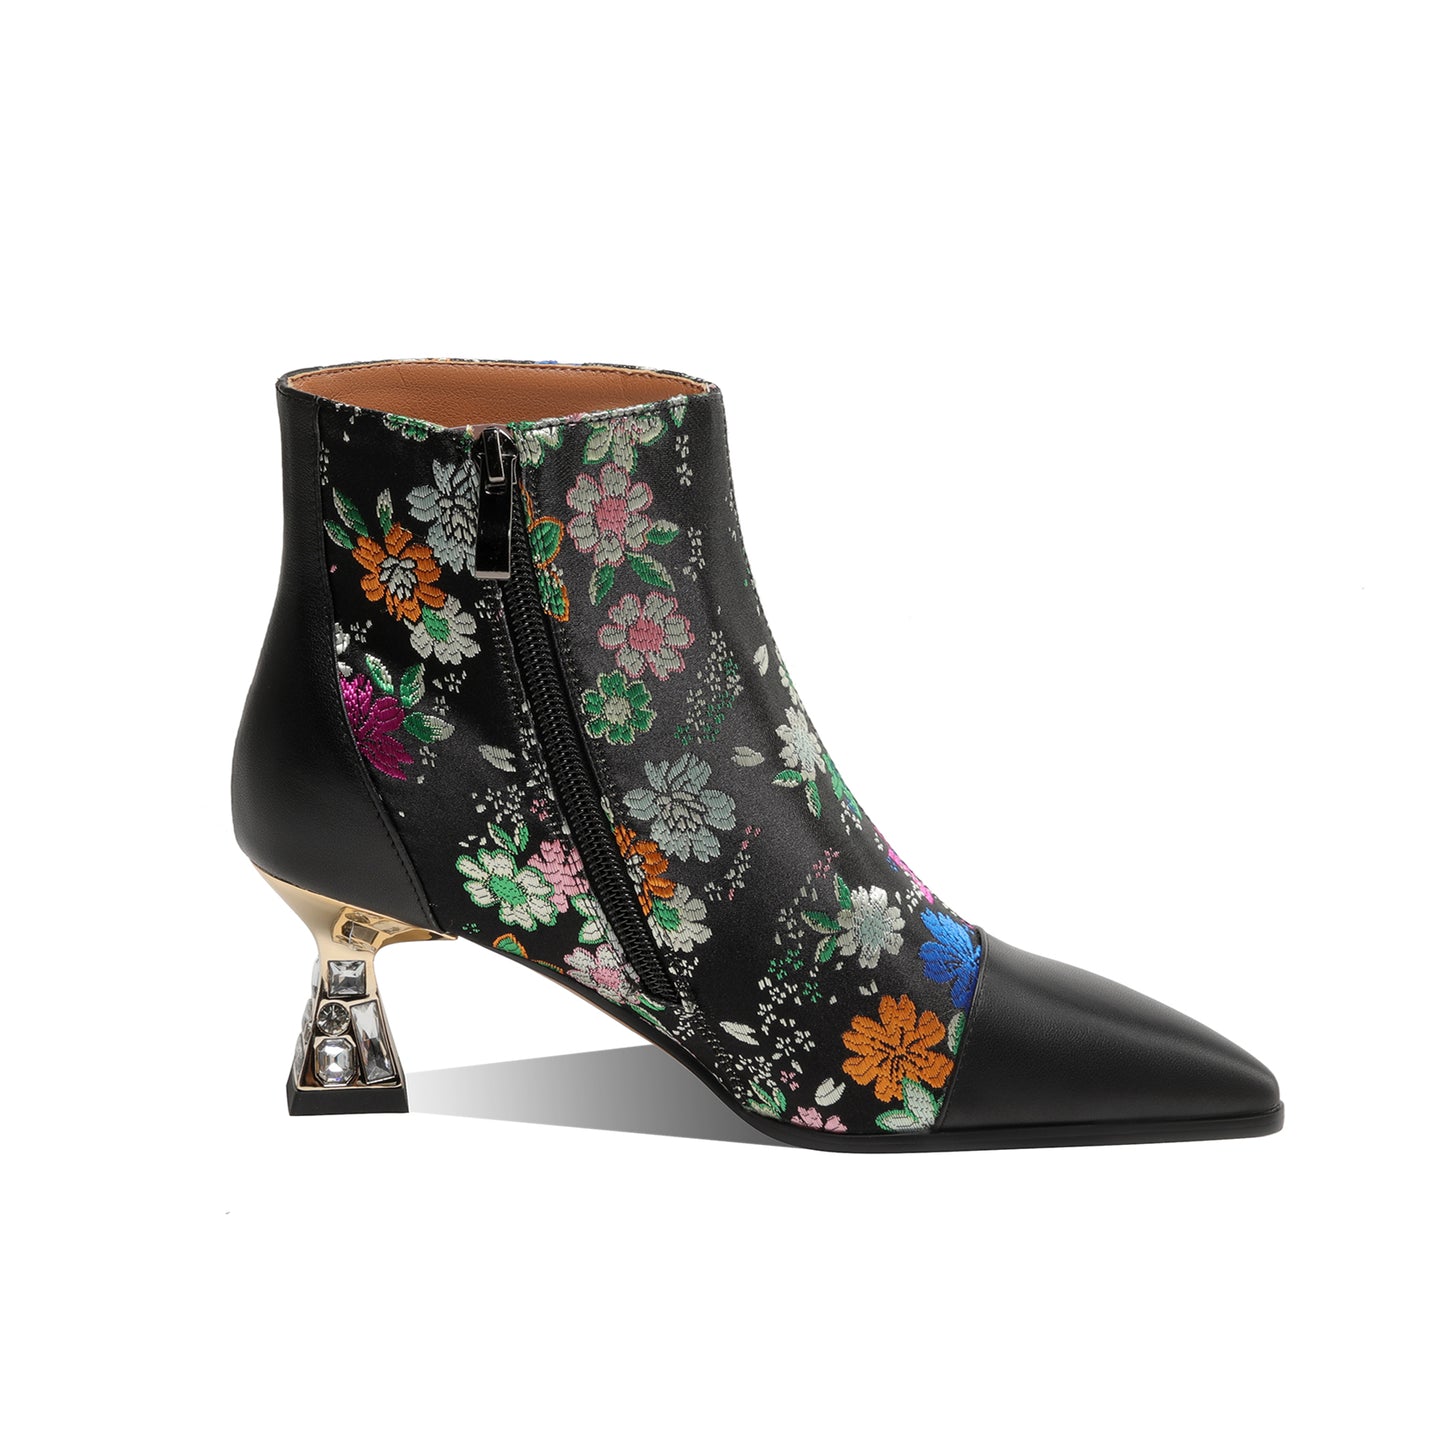 TinaCus Women's Handmade Genuine Leather Embroidered Flowers Crystal Heel Side Zip Ankle Boots